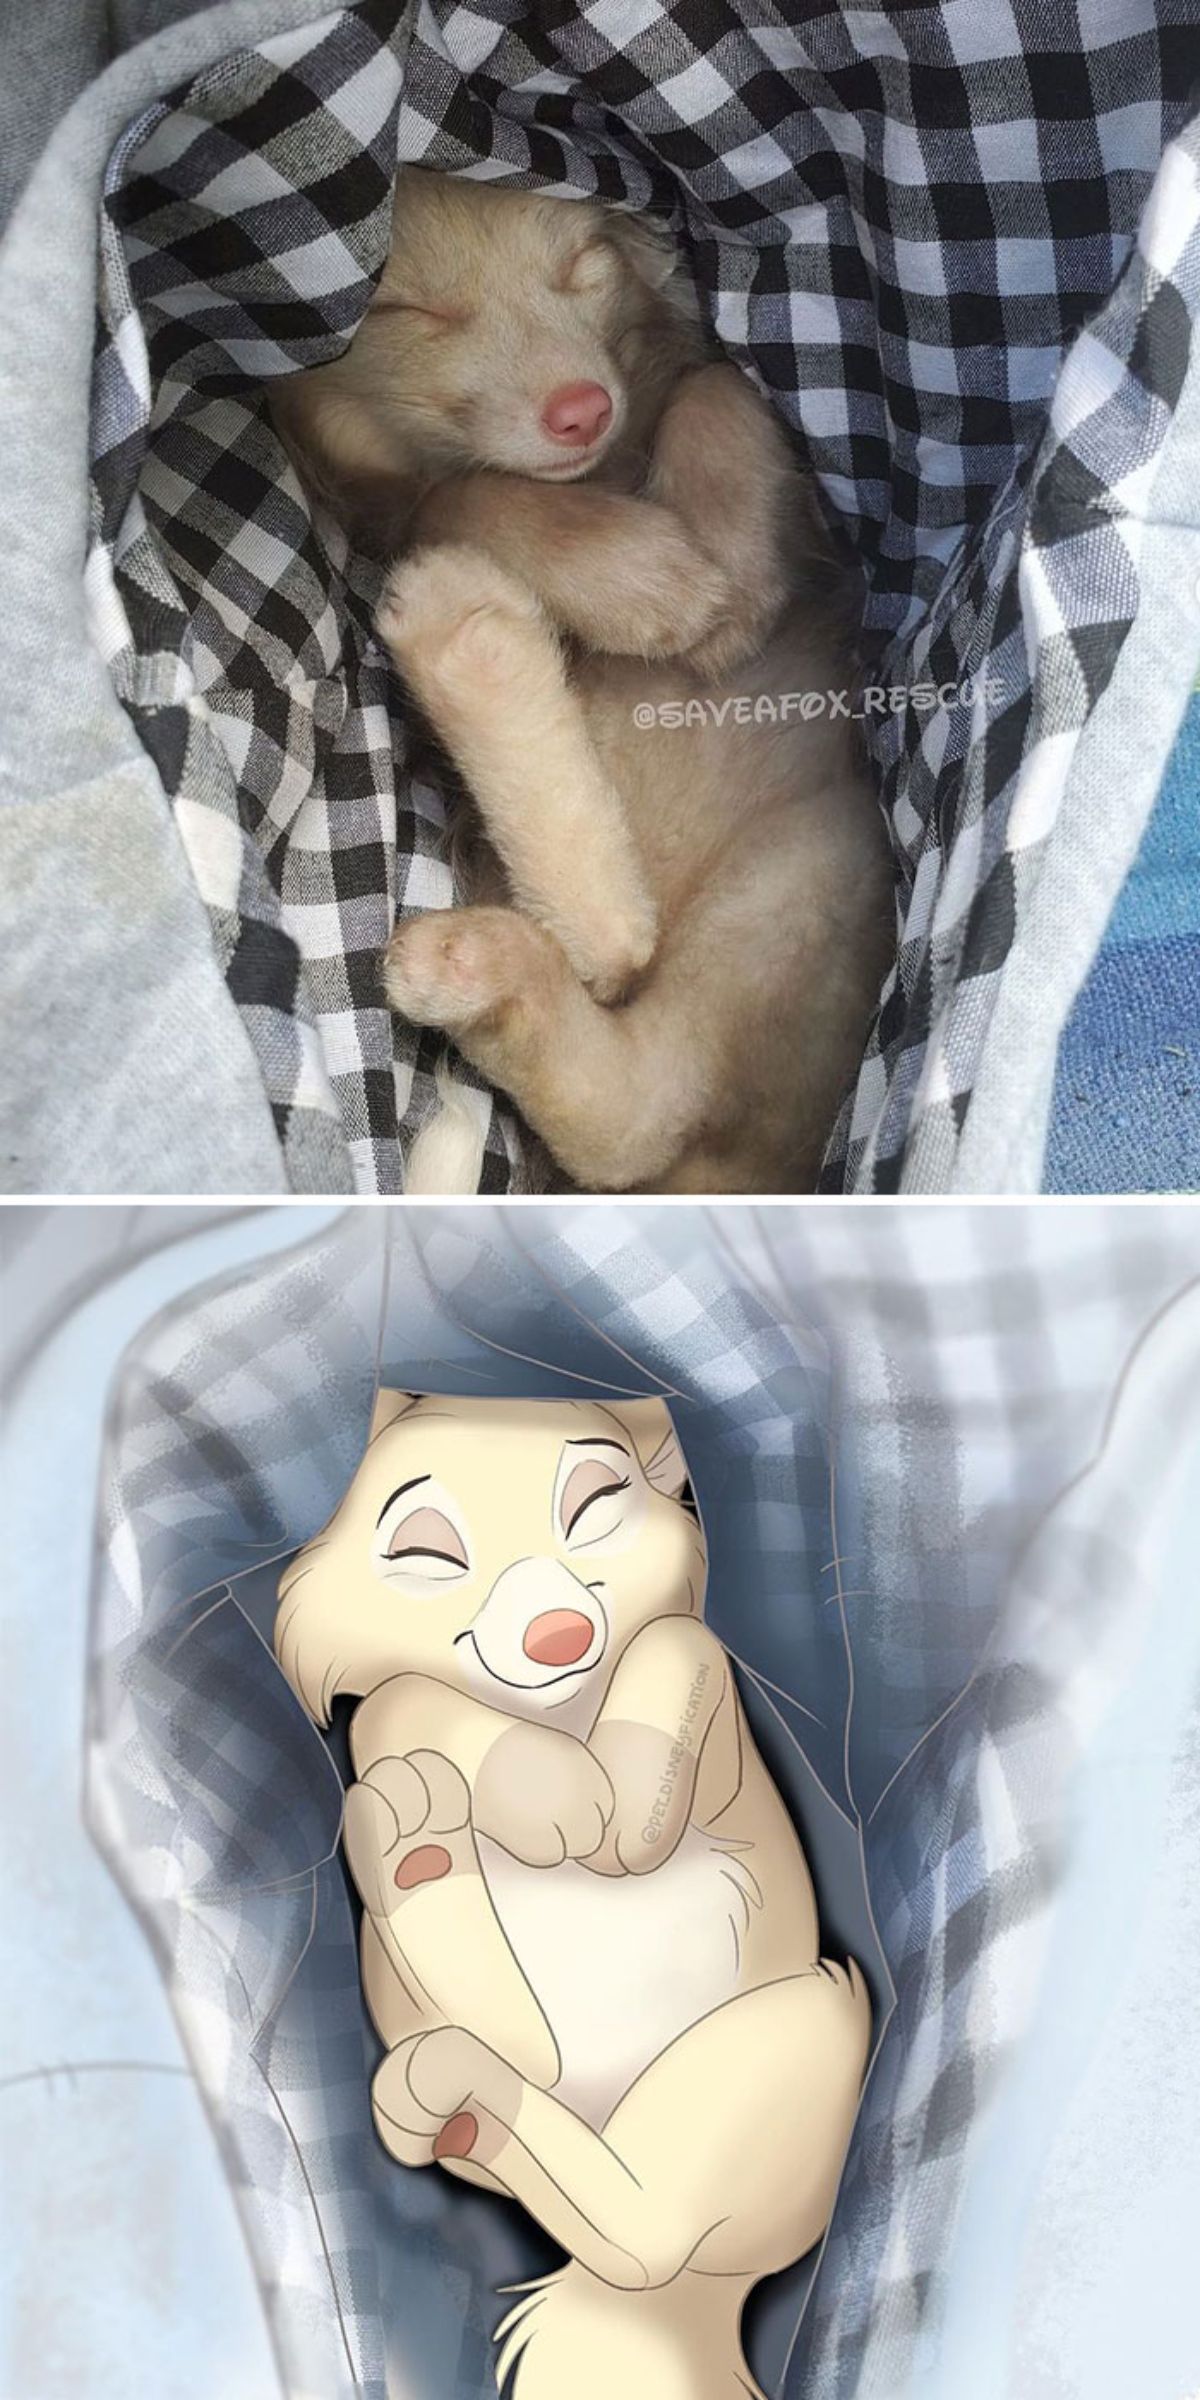 real photo and cartoon image of a brown fox cub sleeping in a black and white checked bed